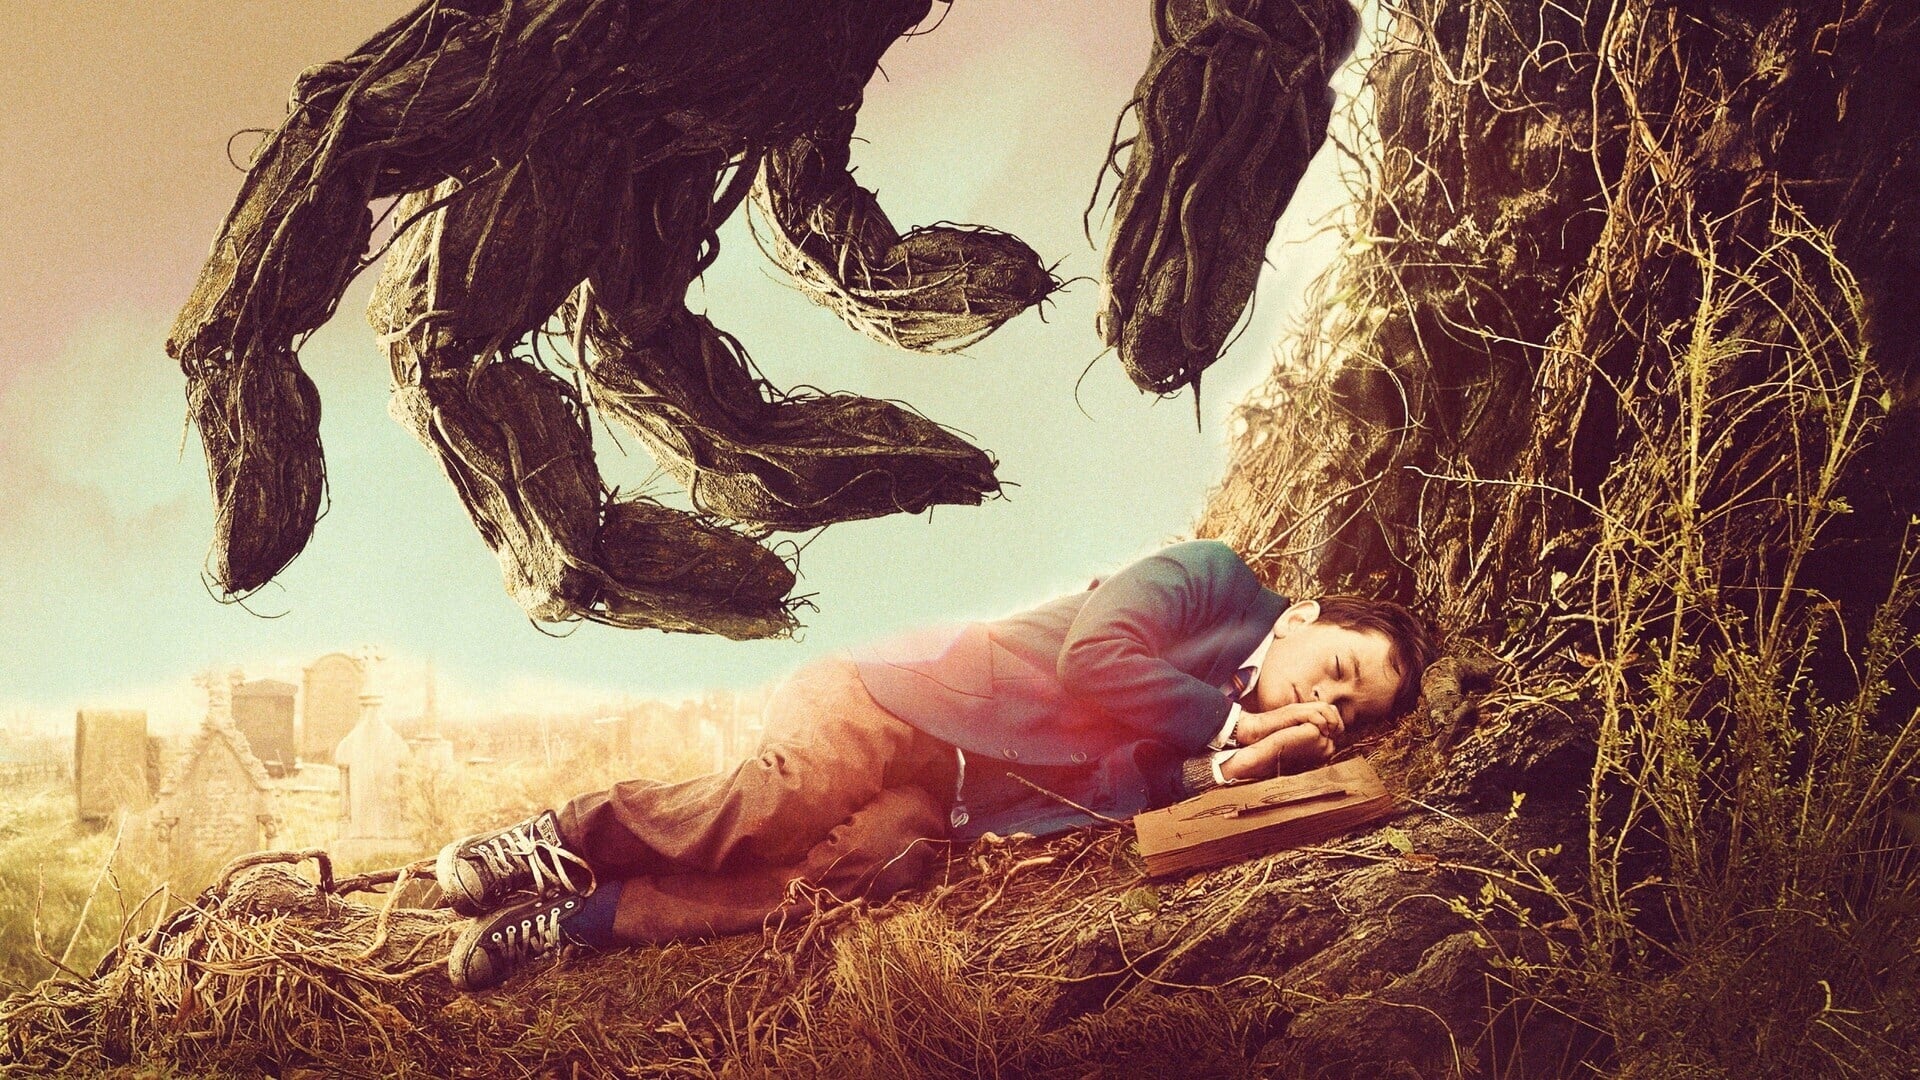 A Monster Calls 2016 123movies